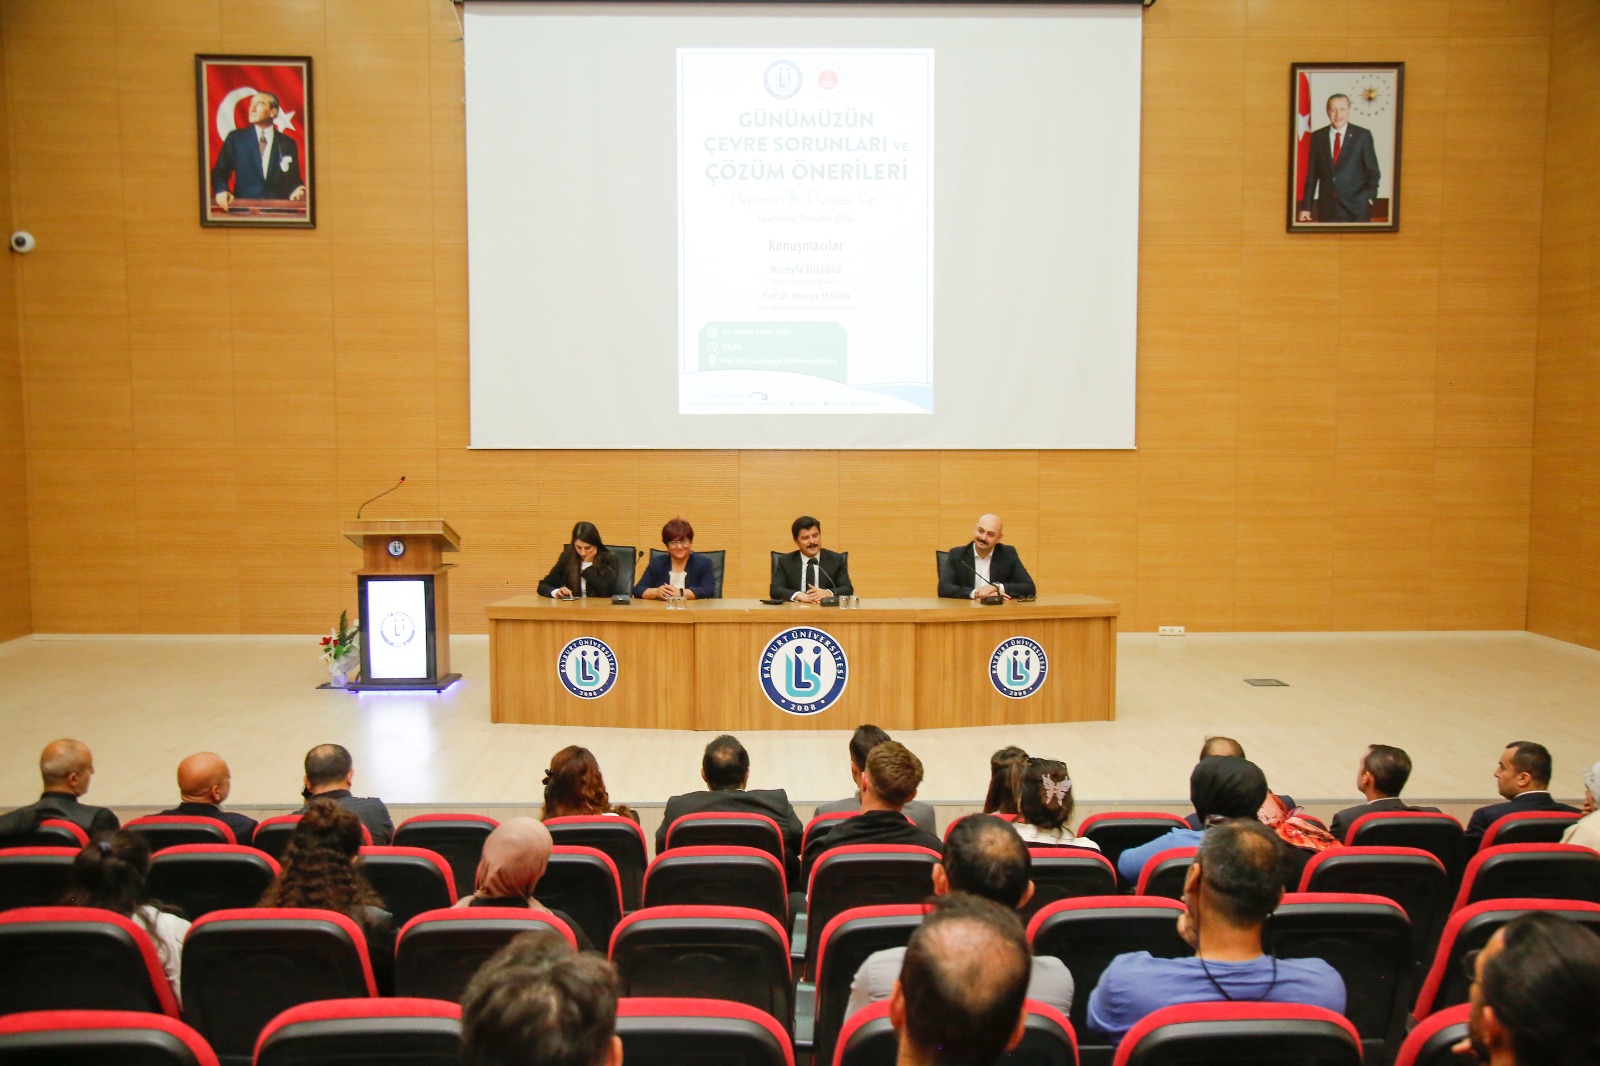 Conference on Environmental Problems was held with the participation of Chief Prosecutor Yücedağ